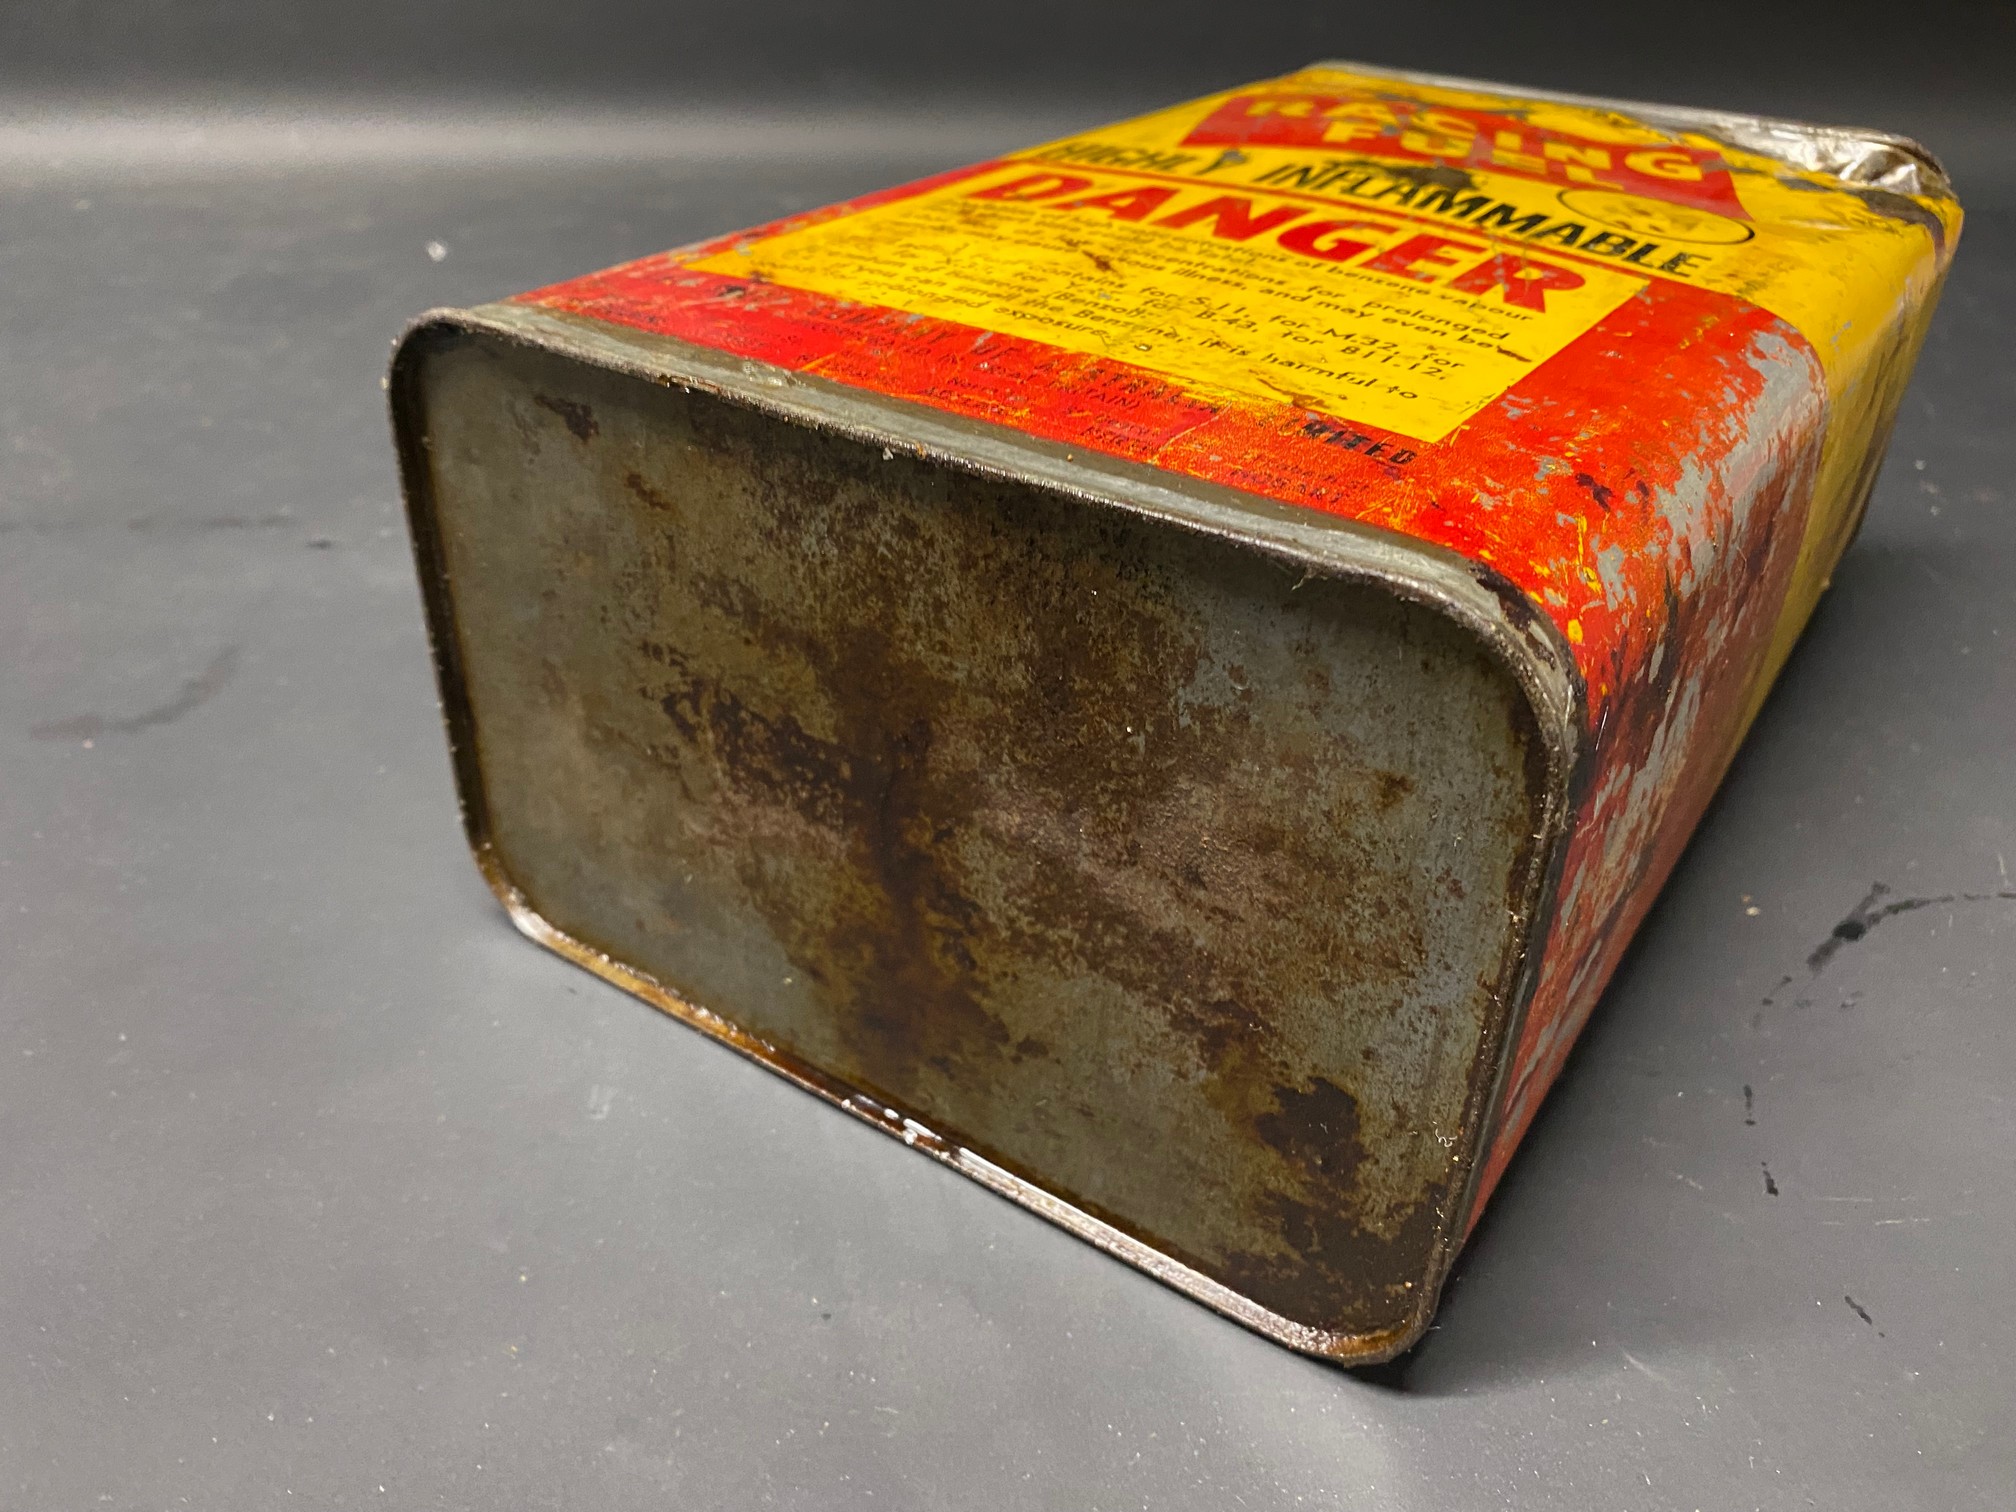 A Shell Racing Fuel gallon can. - Image 4 of 4